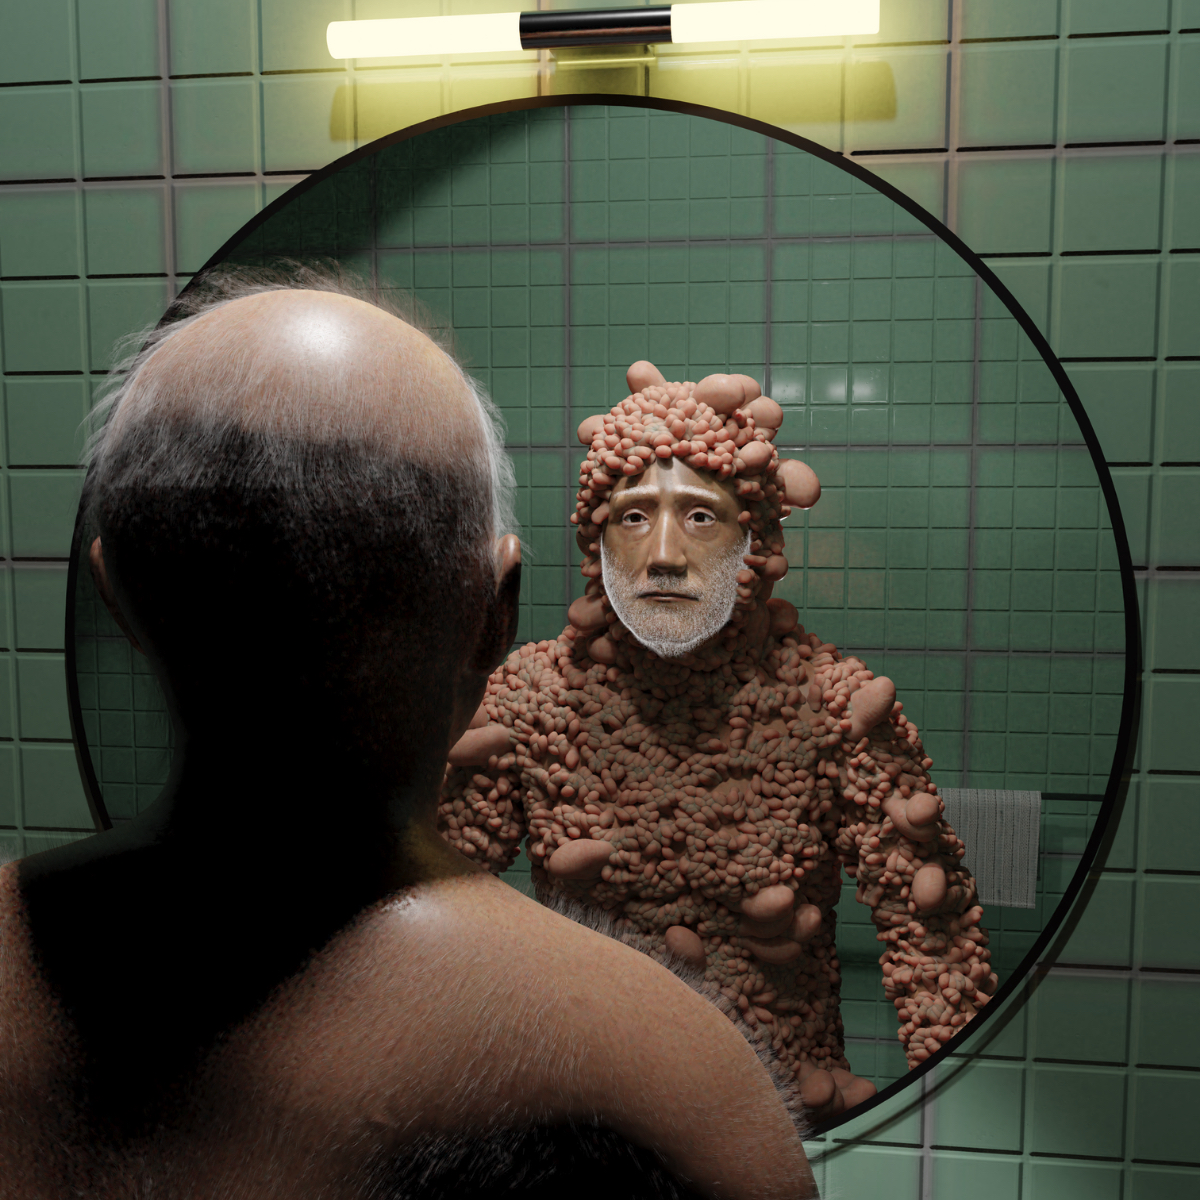 Matteo Ingrao, sculpture, art - Photo of a bearded man covered in rounded lumps of flesh-like material looking at himself in the mirror